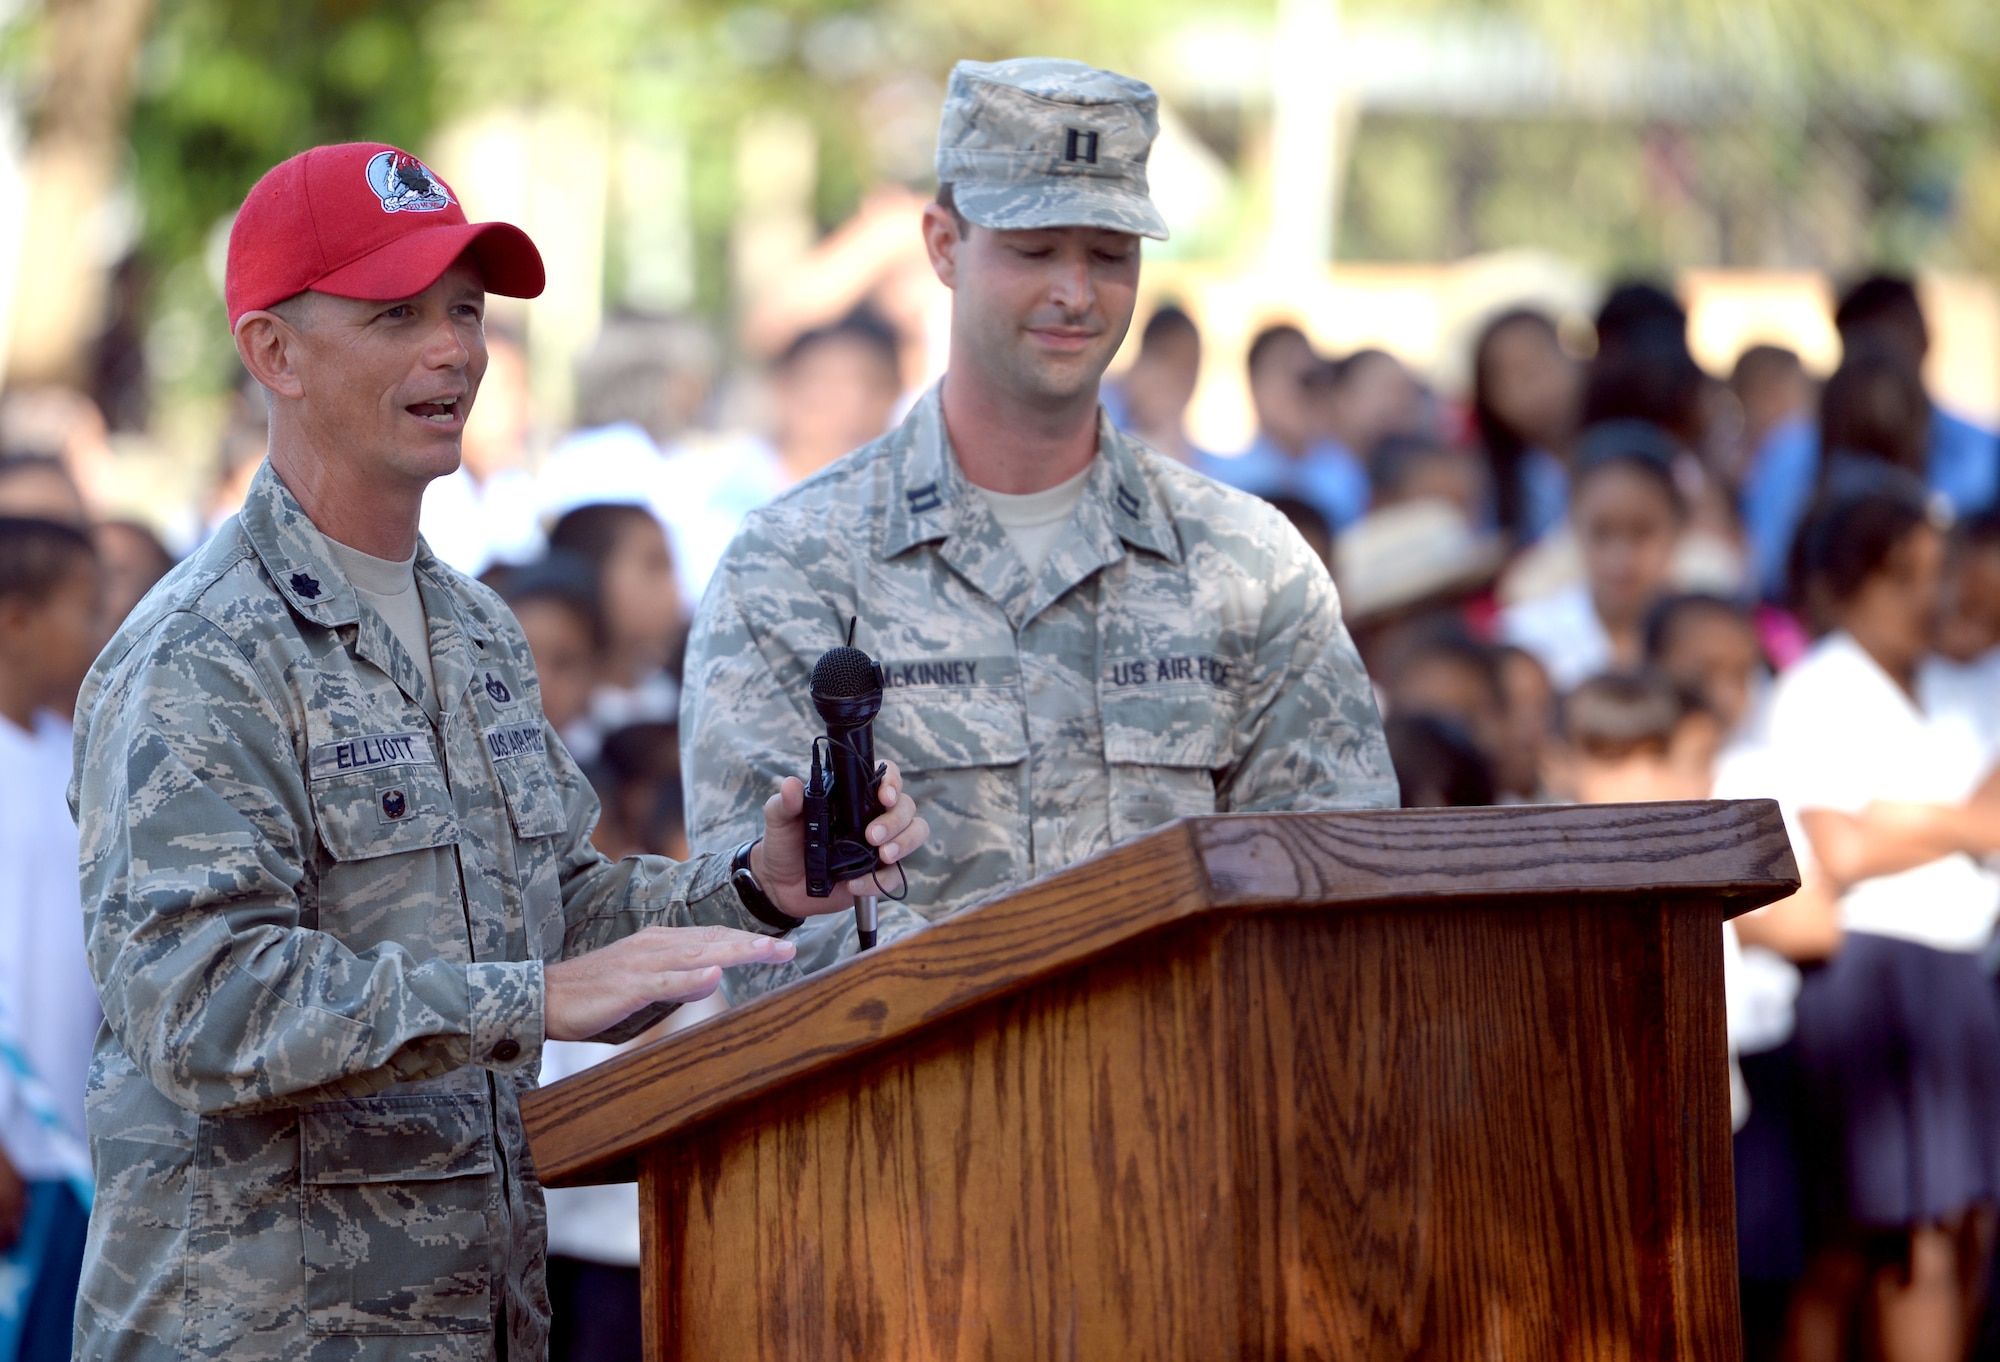 U.S. Air Force Lt. Col. Ryan Elliott, New Horizons Honduras commander and 823rd RED HORSE deputy commander and Grove City, Pa., speaks at the groundbreaking ceremony at the Gabriela Mistral primary school in Ocotoes Alto, Honduras, June 1, 2015. U.S. Air Force Capt. Austin McKinney, 8th Air Force Life Cycle Management Center deputy program manager out of Hanscom Air Force Base, Mass., and Canton, Mich., native, translates. The event also acted as an official start to the New Horizons exercise which will take place in and around the Trujillo and Tocoa areas. New Horizons was launched in the 1980s and is an annual joint humanitarian assistance exercise that U.S. Southern Command conducts with a partner nation in Central America, South America or the Caribbean. The exercise improves joint training readiness of U.S. and partner nation civil engineers, medical professionals and support personnel through humanitarian assistance activities. (U.S. Air Force photo by Capt. David J. Murphy/Released)